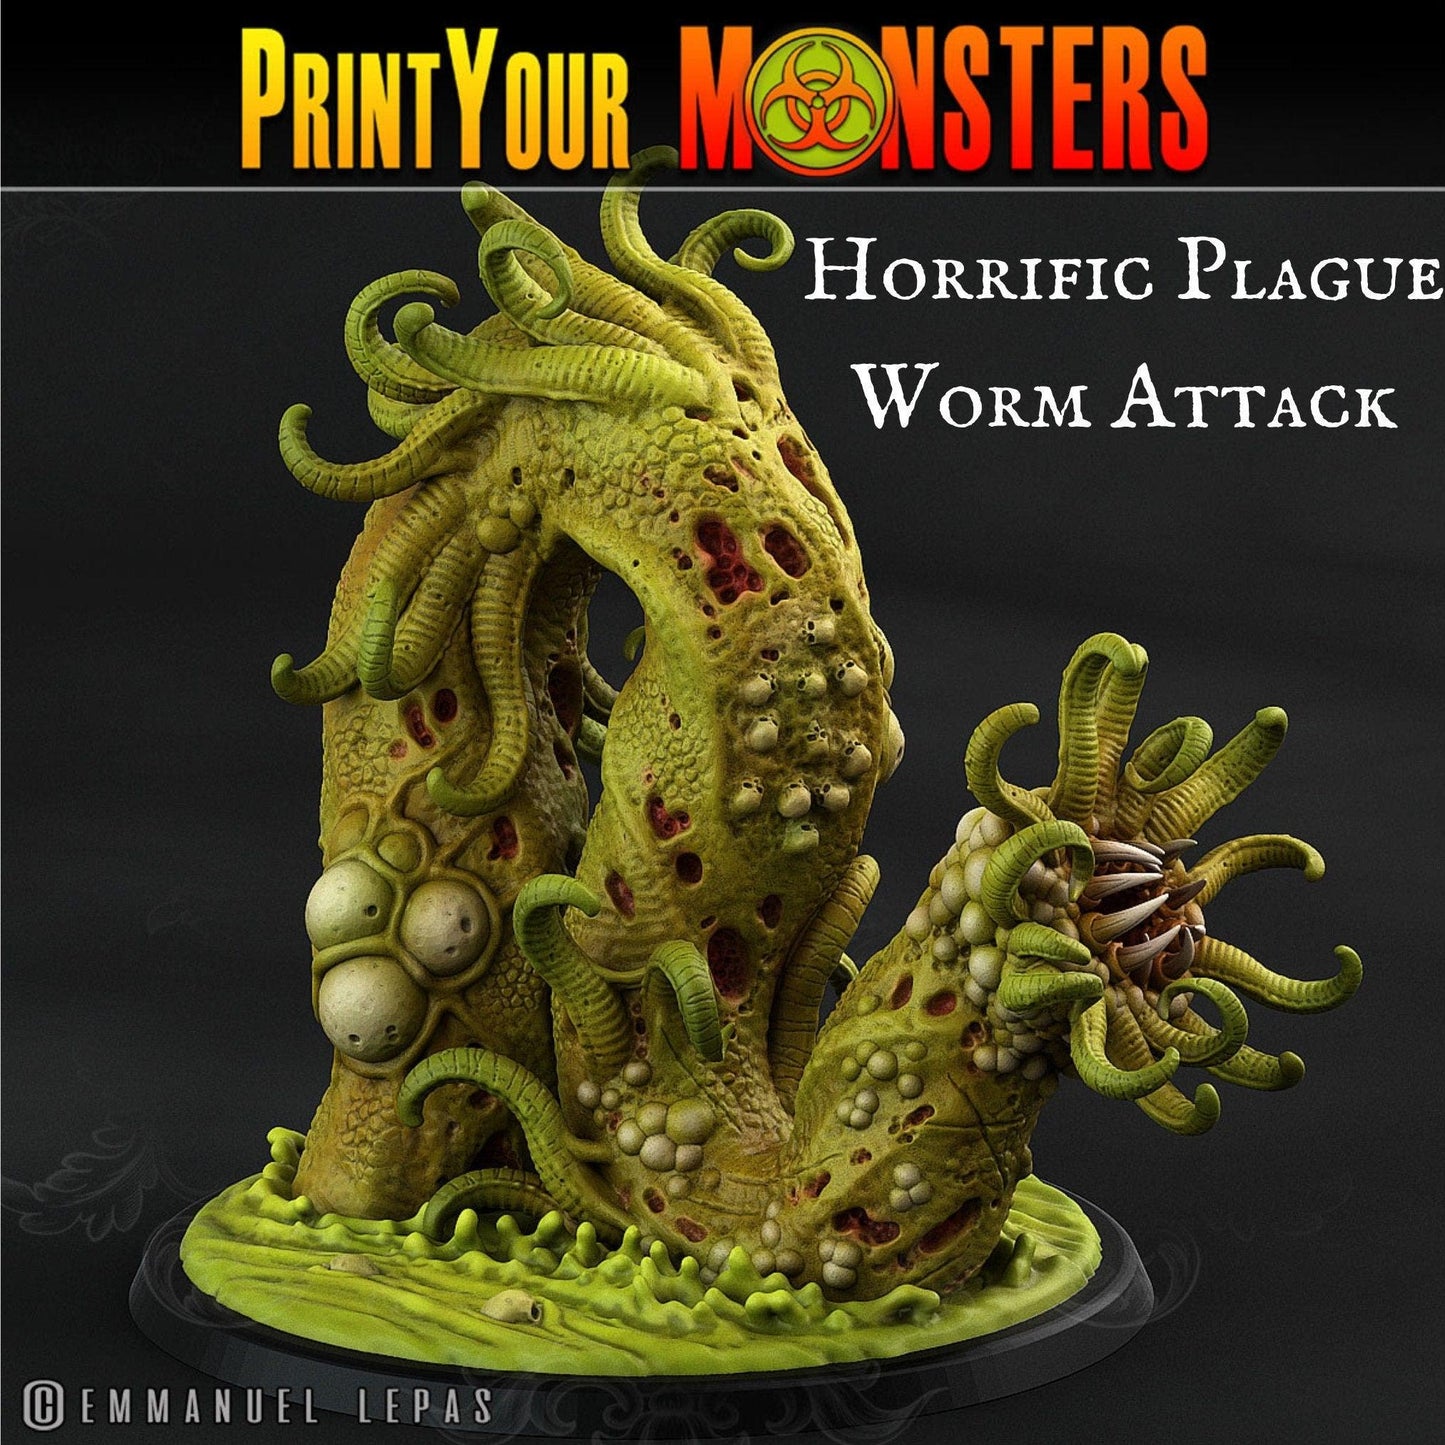 Plague Worm Miniatures | Print Your Monsters | Tabletop gaming | DnD Miniature | Dungeons and Dragons, dnd 5e worm miniature - Plague Miniatures shop for DnD Miniatures